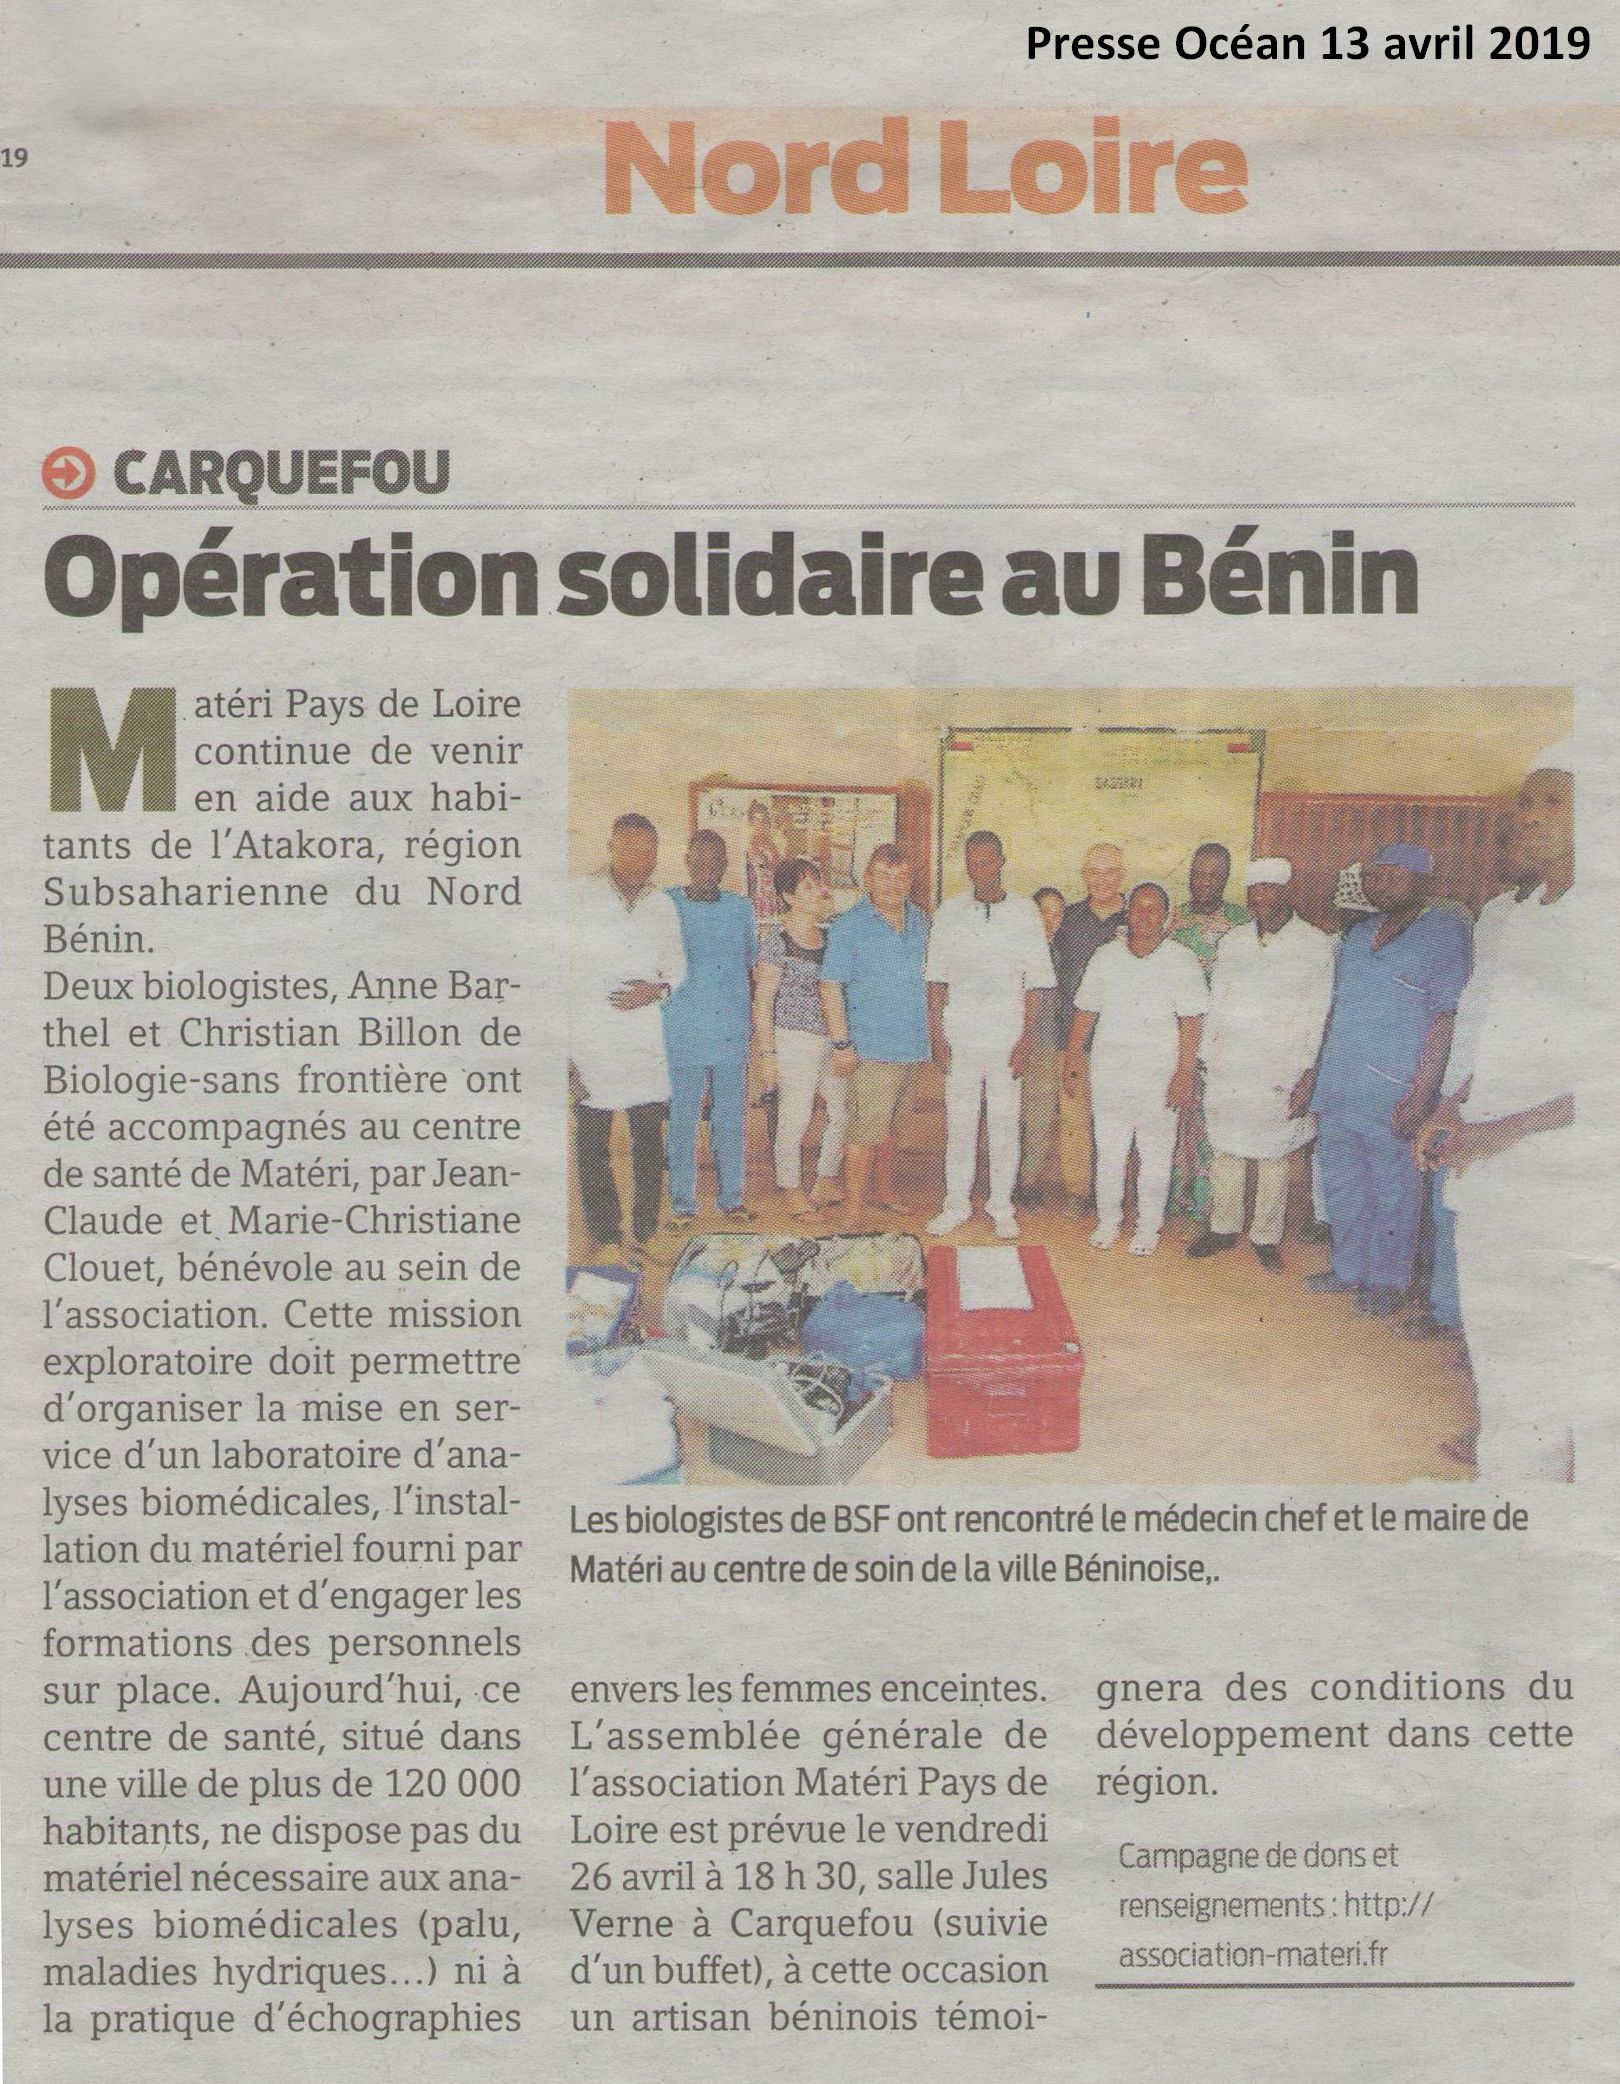 PO 13 avril 2019 Operation Solidaire